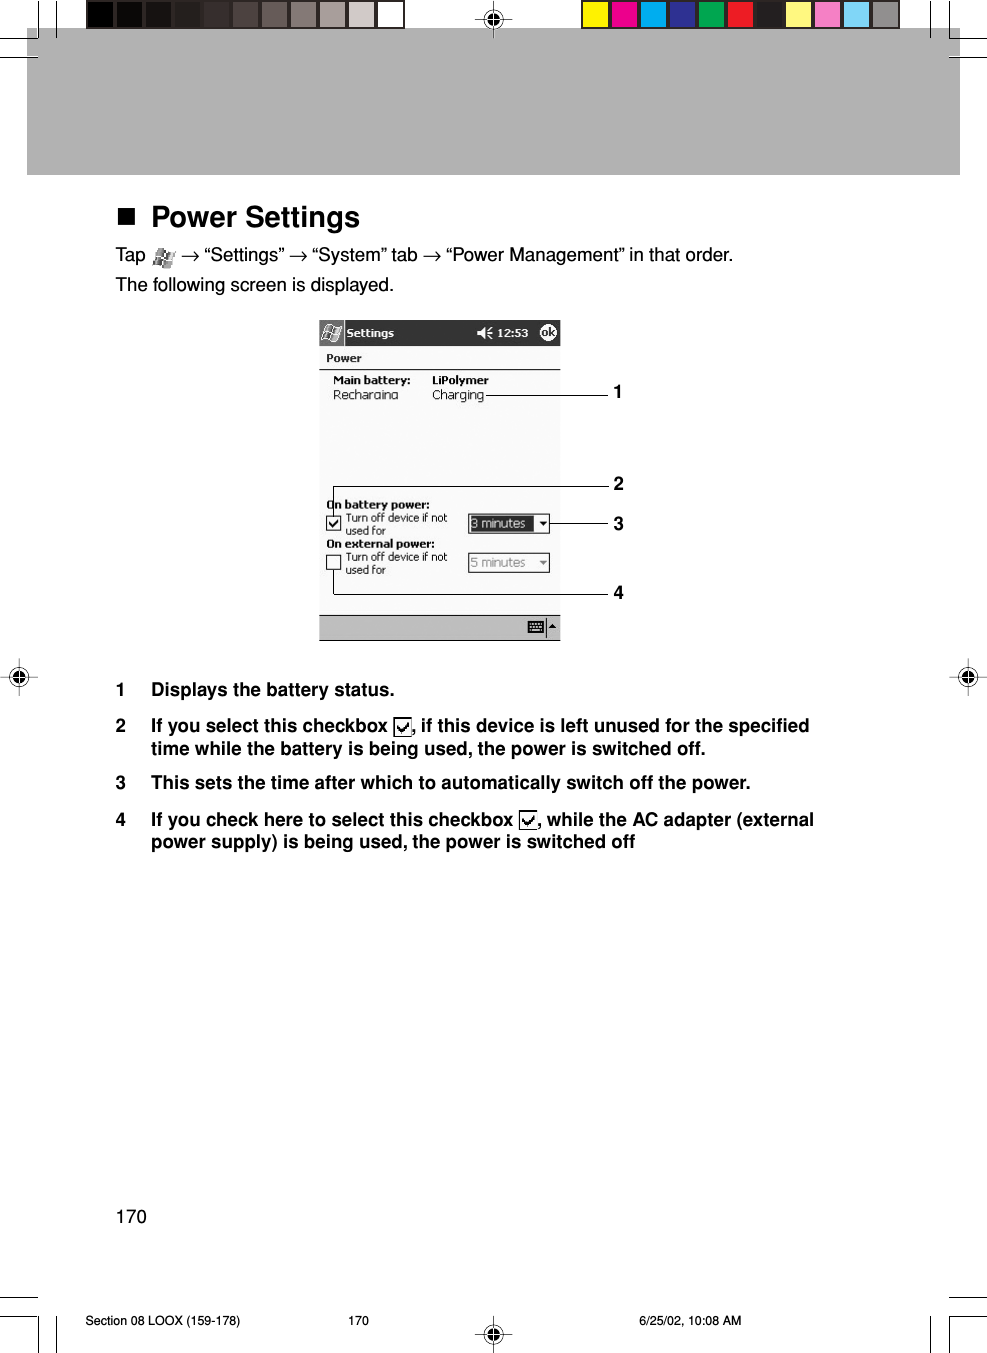 170Power SettingsTap   → “Settings” → “System” tab → “Power Management” in that order.The following screen is displayed.1 Displays the battery status.2 If you select this checkbox  , if this device is left unused for the specifiedtime while the battery is being used, the power is switched off.3 This sets the time after which to automatically switch off the power.4 If you check here to select this checkbox  , while the AC adapter (externalpower supply) is being used, the power is switched off4321Section 08 LOOX (159-178) 6/25/02, 10:08 AM170